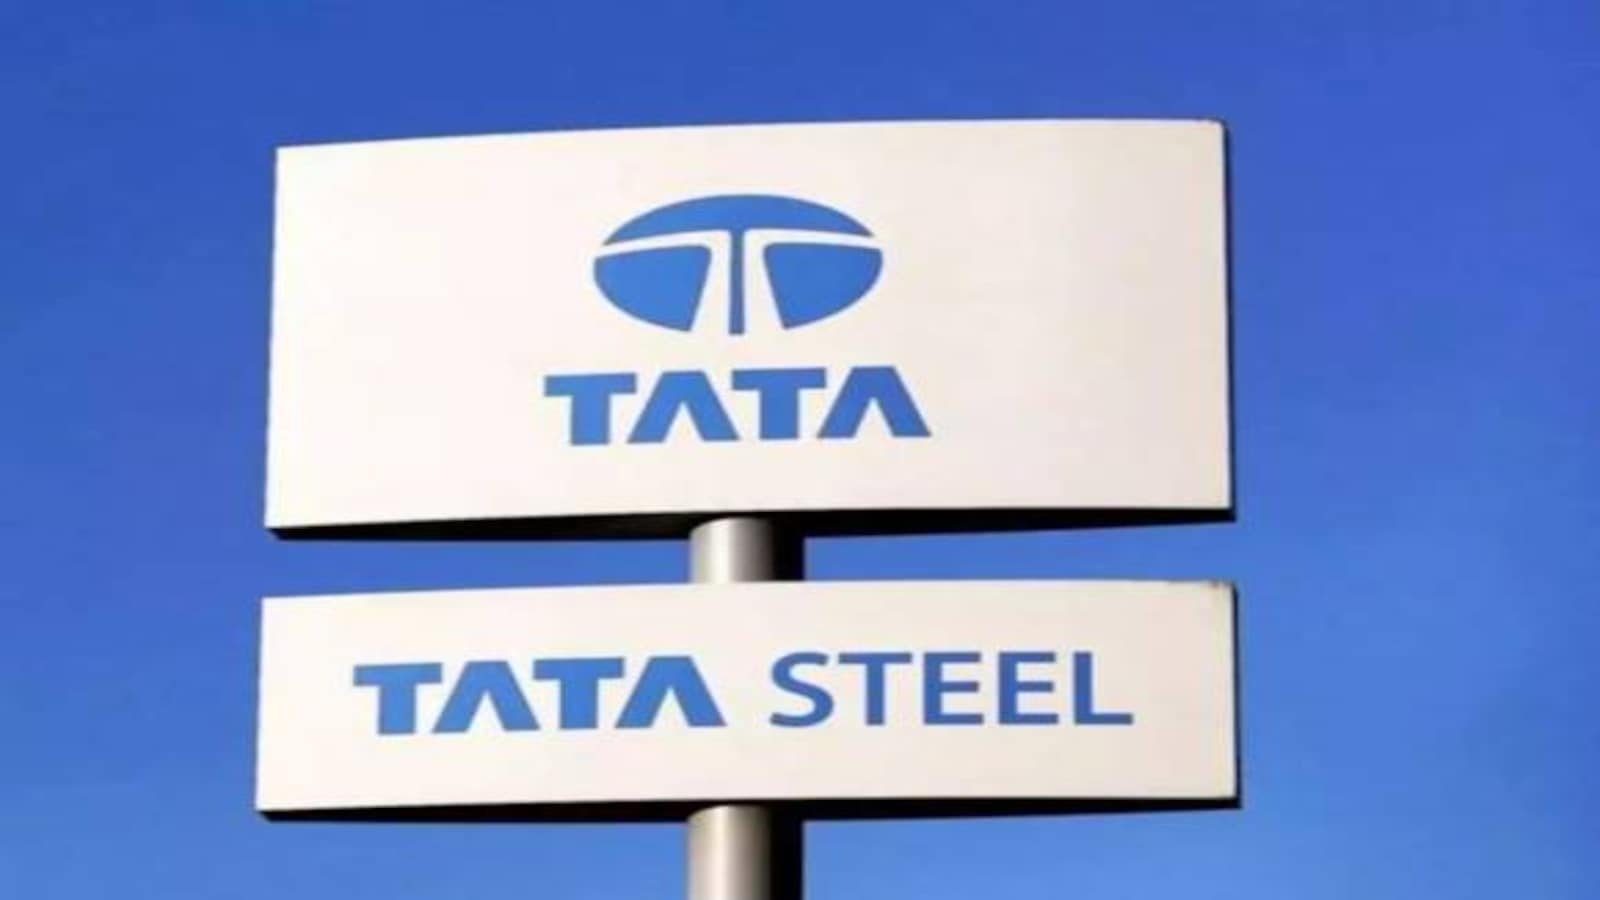 Tata Steel share price rises on BBB- rating upgrade